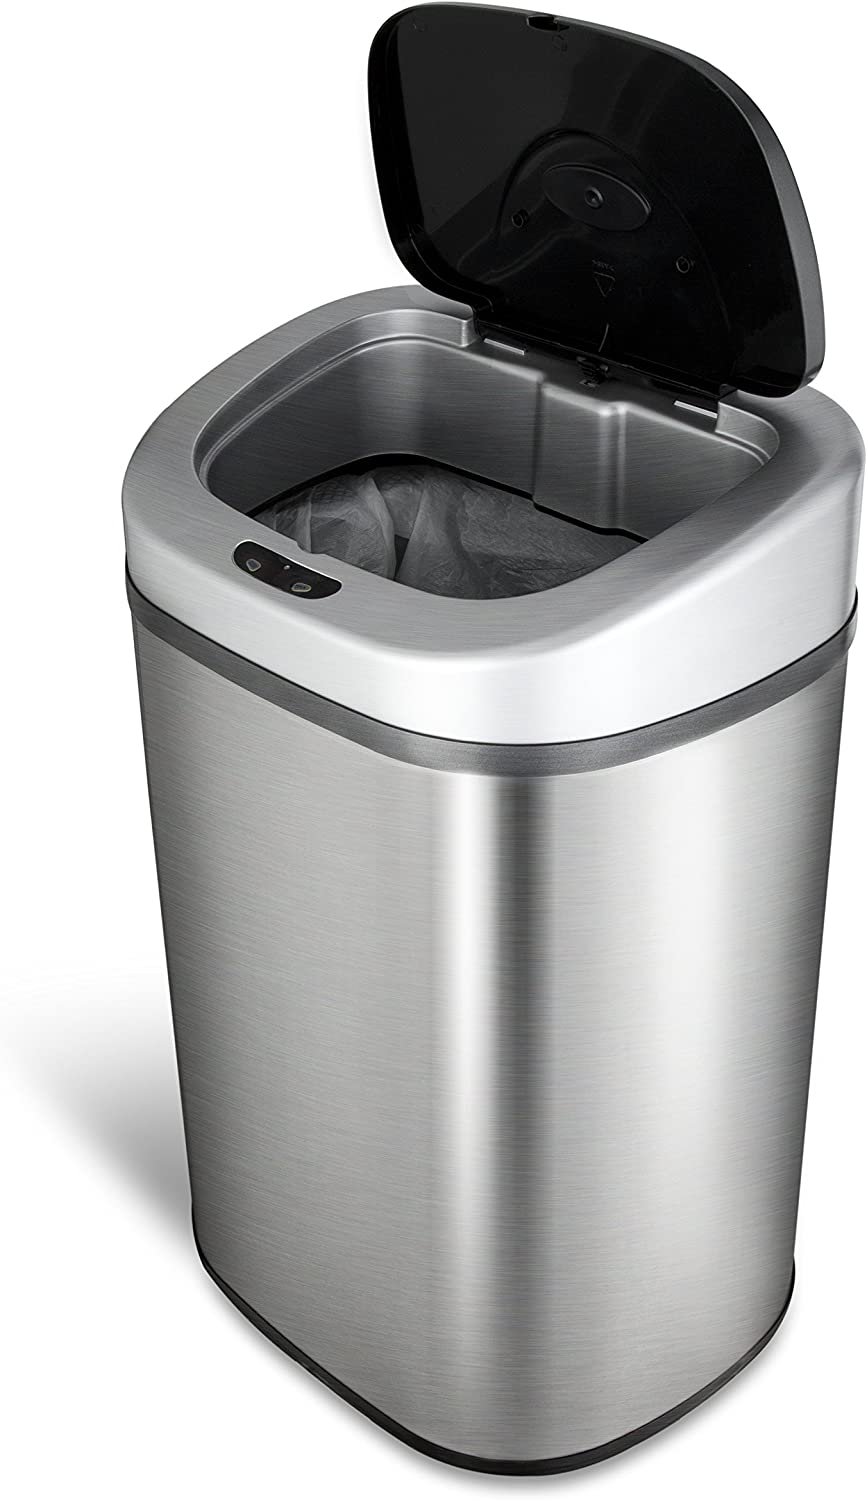 https://bigbigmart.com/wp-content/uploads/2023/05/NINESTARS-Automatic-Touchless-Infrared-Motion-Sensor-Trash-Can-with-Stainless-Steel-Base-Oval-Silver-Black-Lid-21-Gal10.jpg